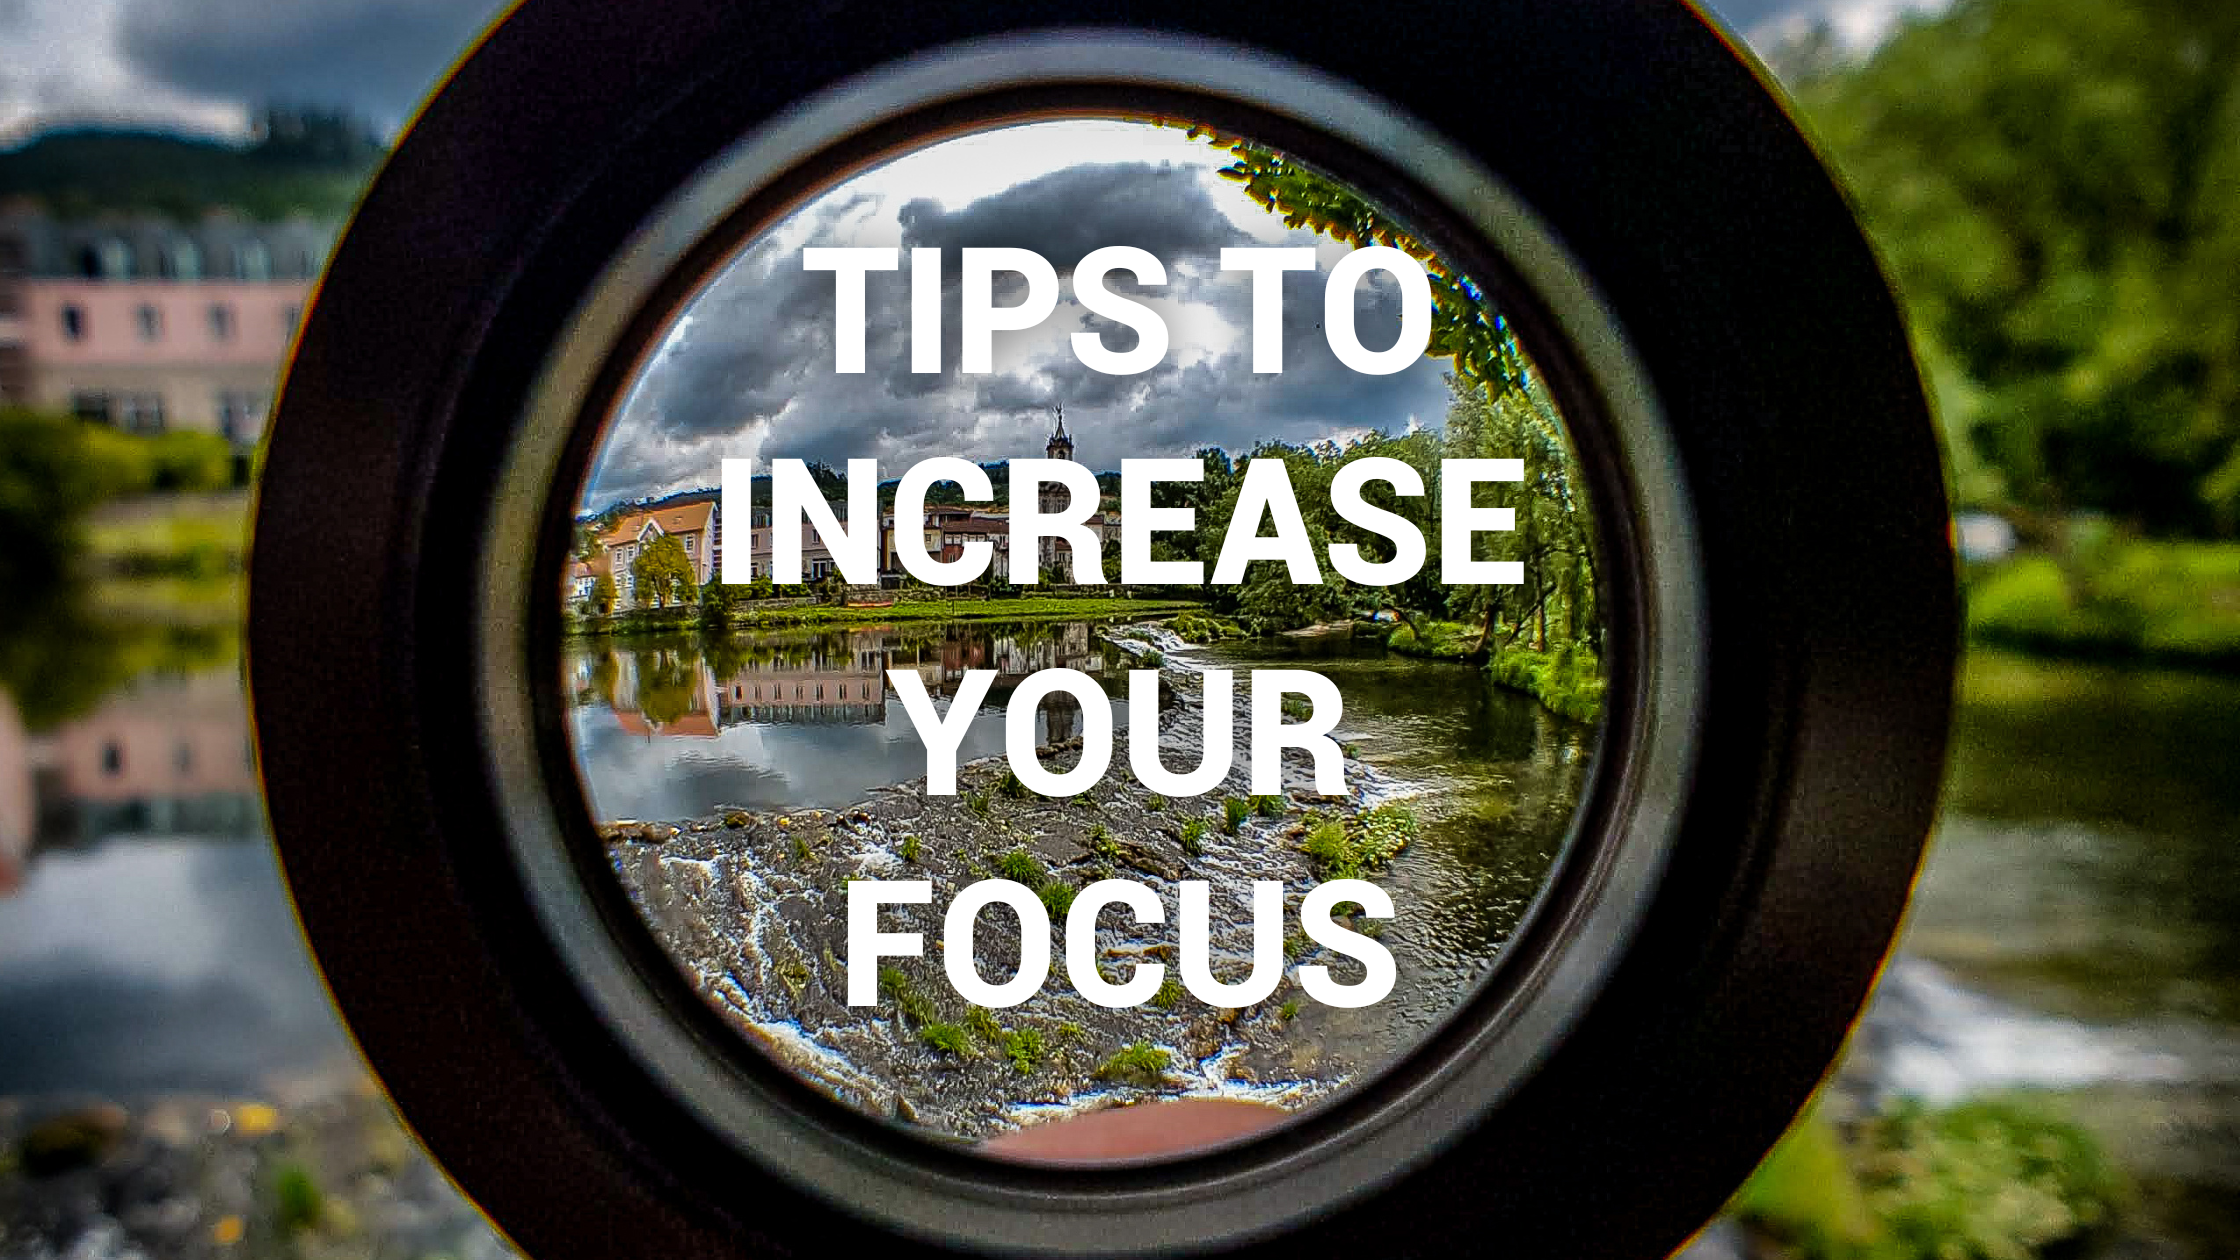 091123 Tips to Increase Focus Blog Banner